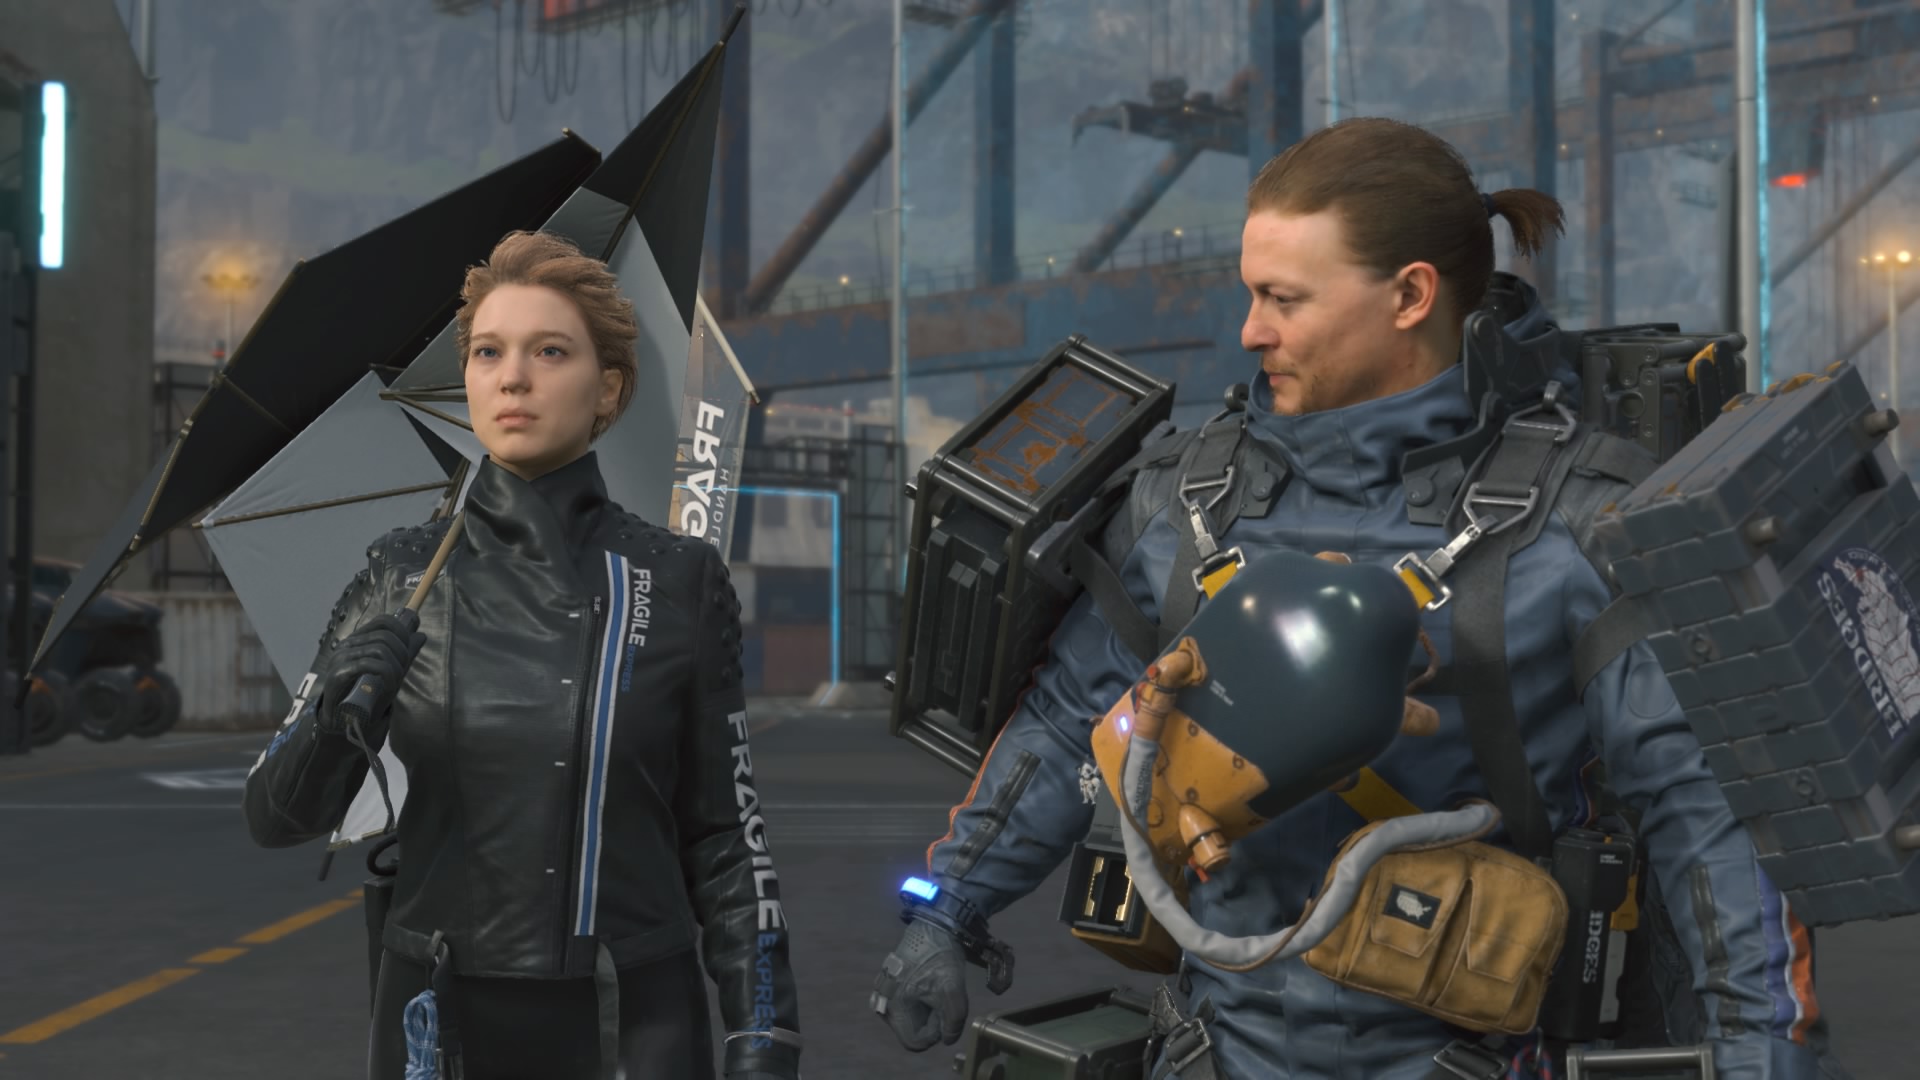 Negative Death Stranding User Ratings Suspiciously Disappear from